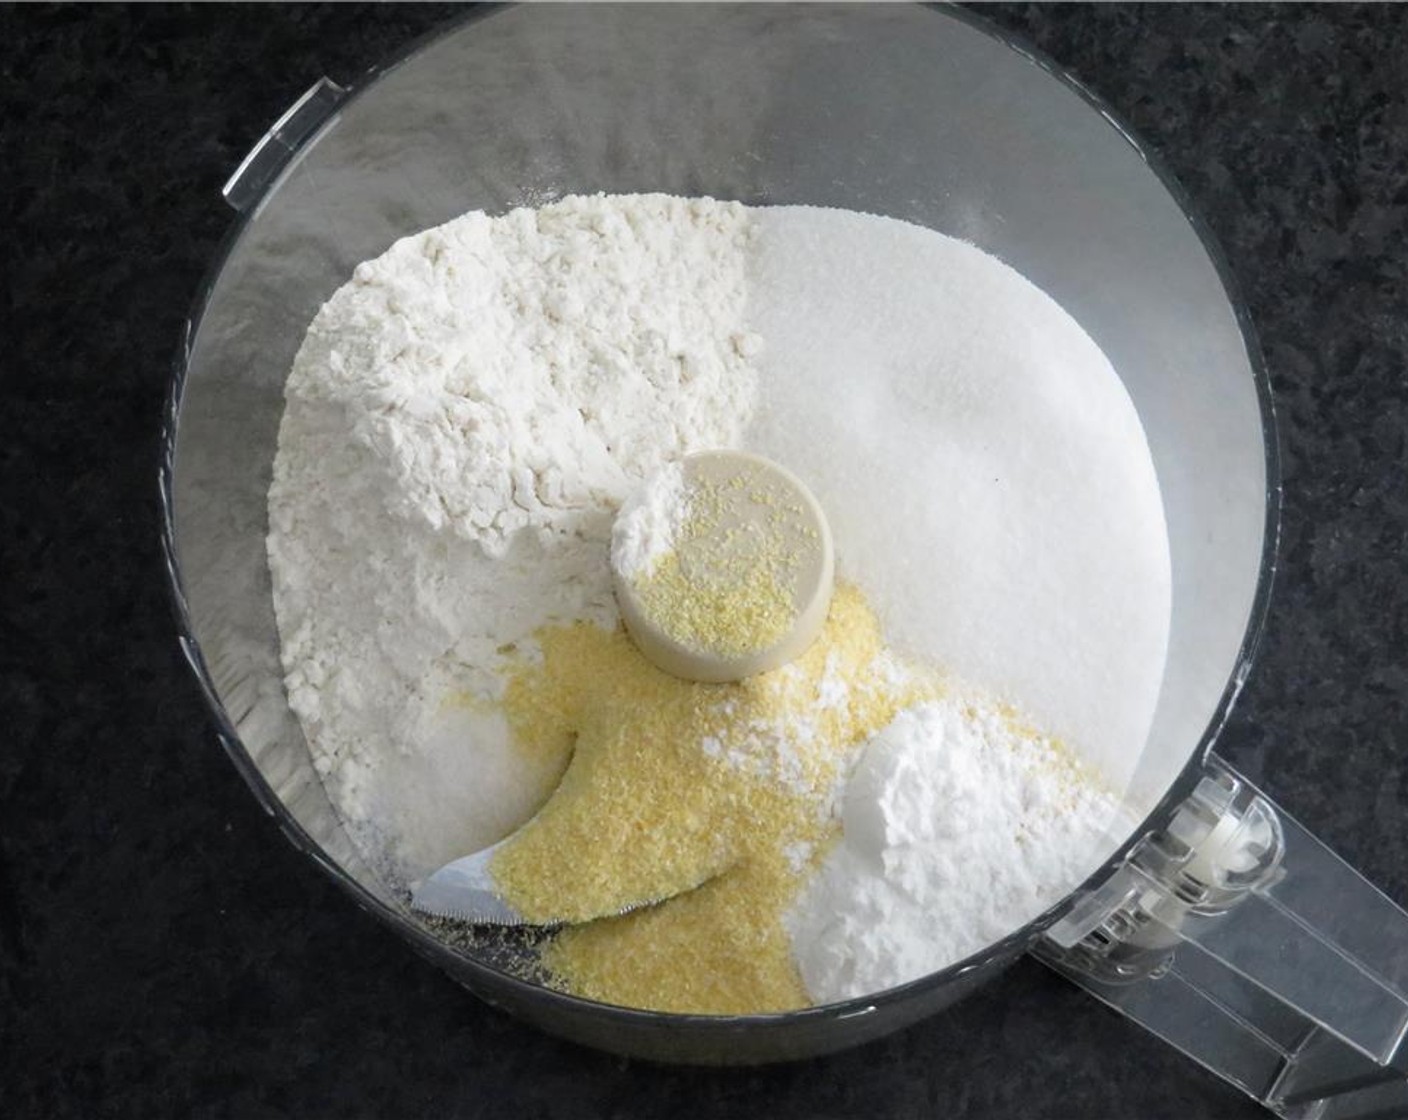 step 3 In a food processor, add All-Purpose Flour (3/4 cup), Cornmeal (1/2 cup), Granulated Sugar (1/3 cup), Baking Powder (1/2 Tbsp) and Salt (1/4 tsp). Pulse to combine. Cut Unsalted Butter (1/4 cup) into chunks and add to flour mixture.